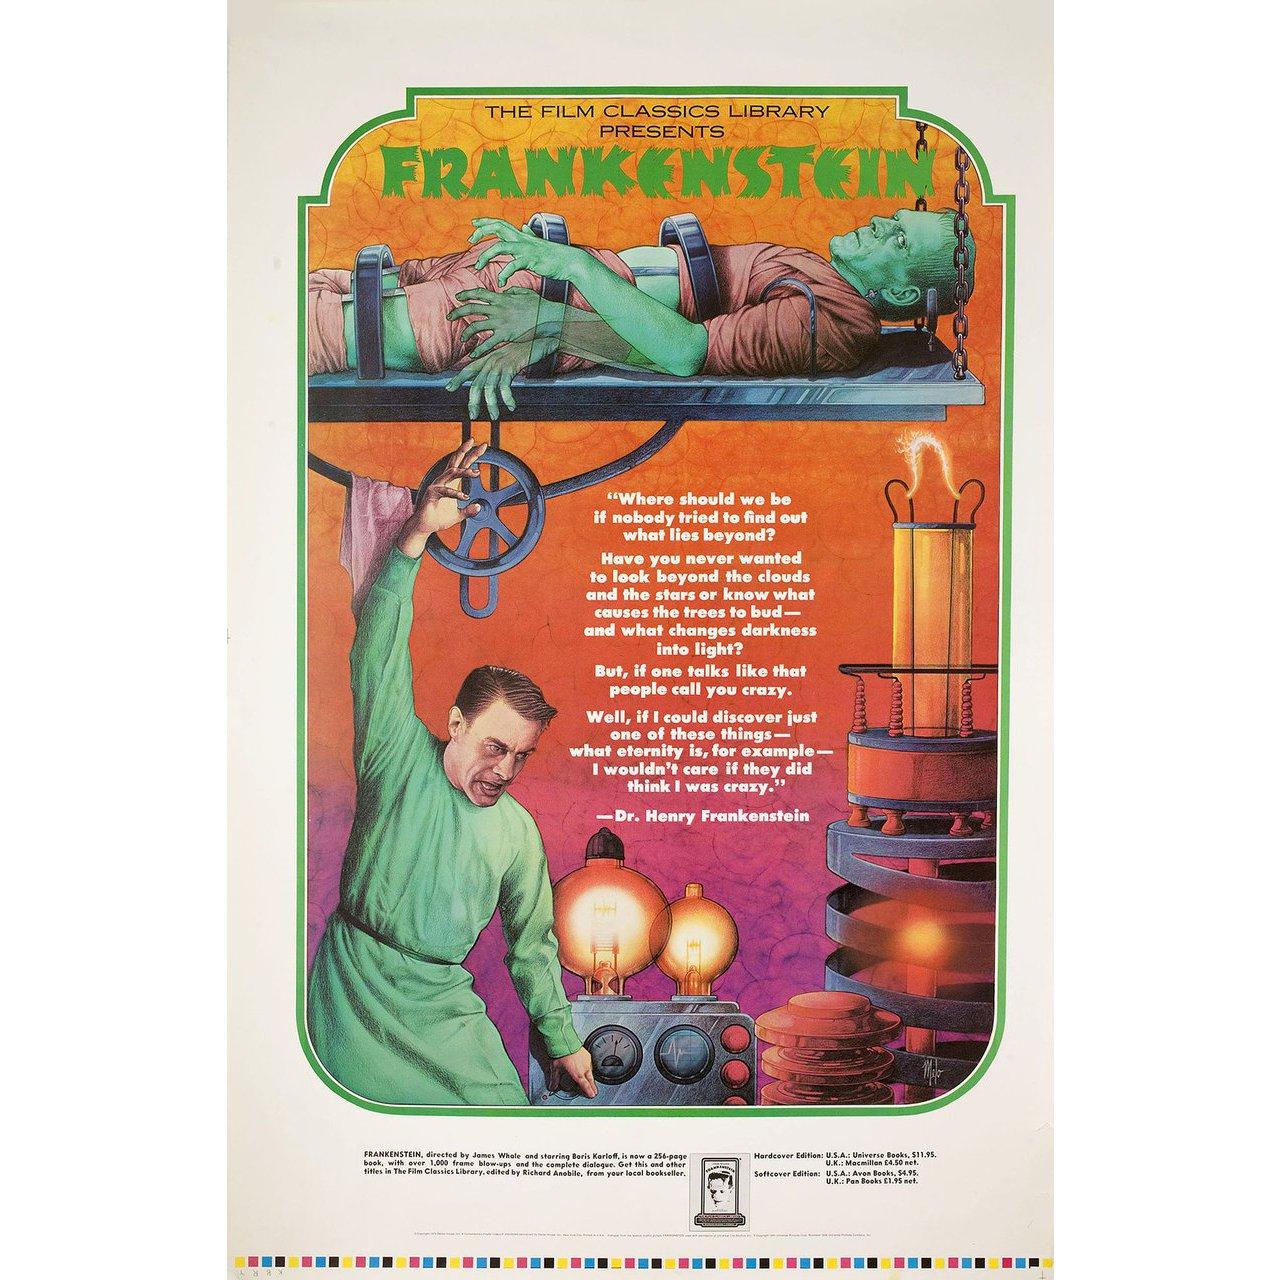 Original 1974 re-release U.S. half subway poster by John Melo for the 1931 film Frankenstein directed by James Whale with Colin Clive / Mae Clarke / John Boles / Boris Karloff. Fine condition, rolled. Please note: The size is stated in inches and